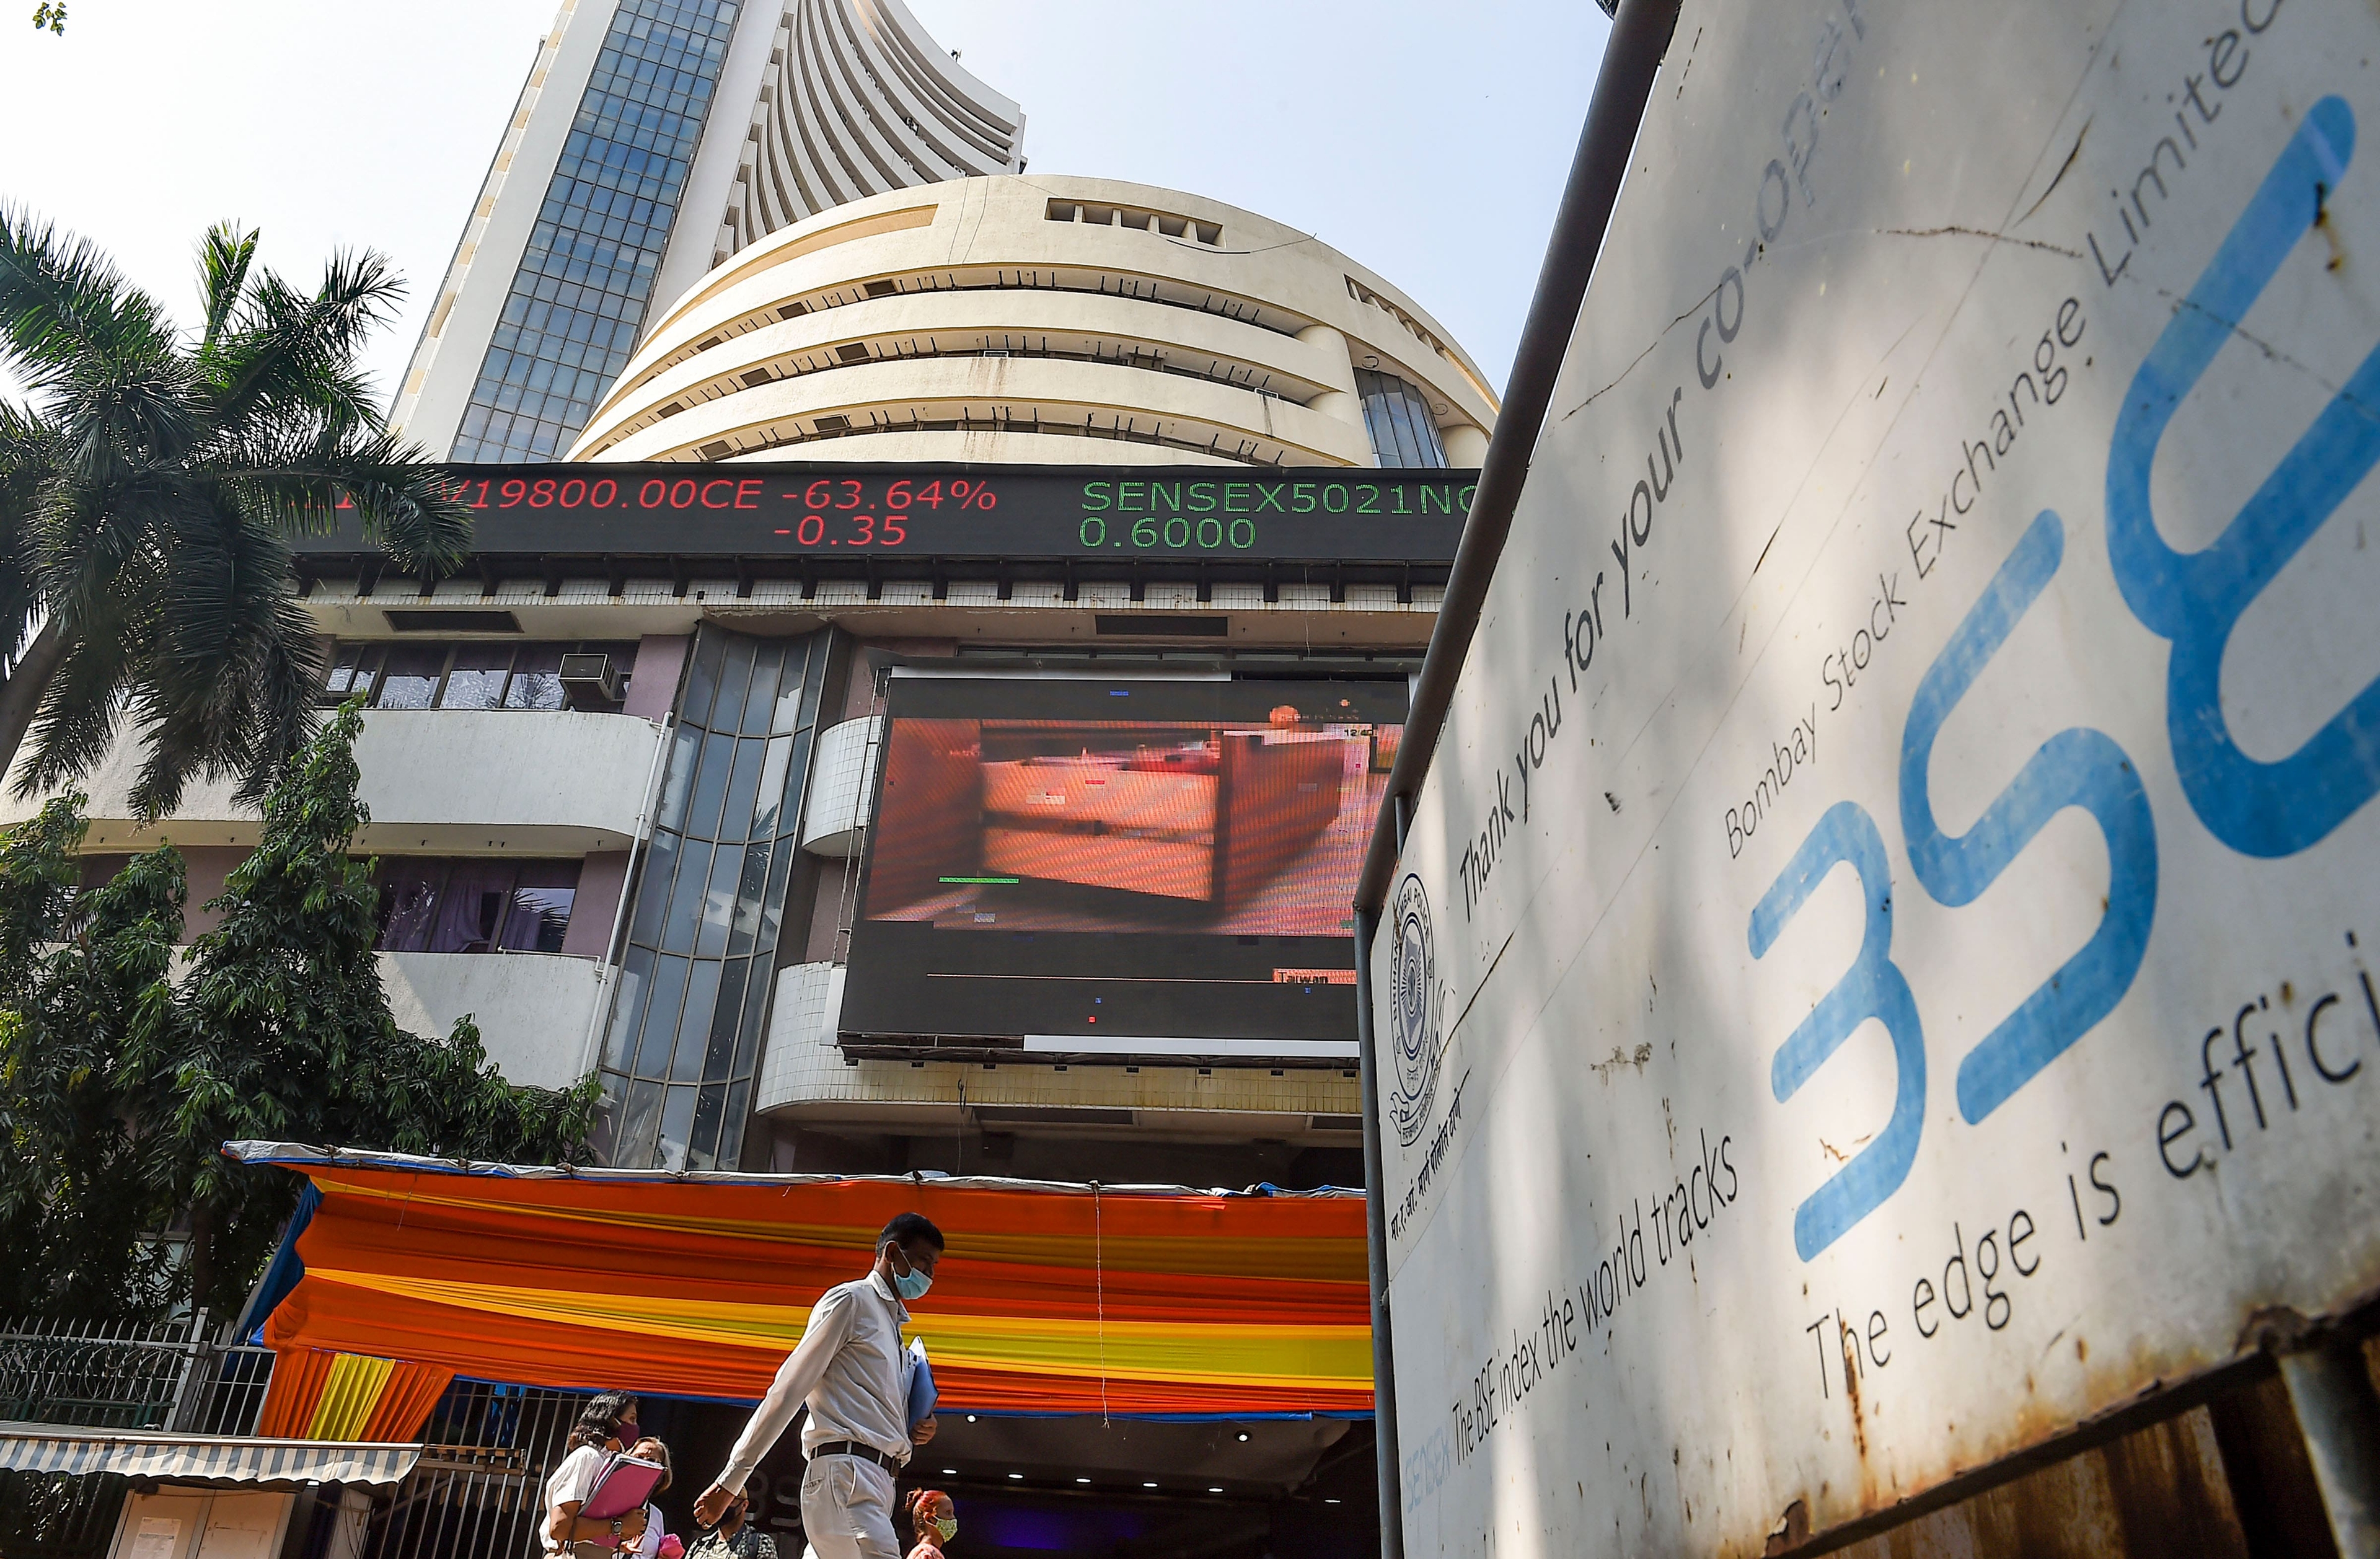 Indian equity benchmarks extended losses to a third straight day on Friday amid heightened geopolitical tensions, after Ukrainian authorities said Russian forces captured the Zaporizhzhia nuclear plant. The Sensex fell 768.9 points to end at 54,333.8 and the Nifty50 settled at 16,245.4, down 252.7 points.